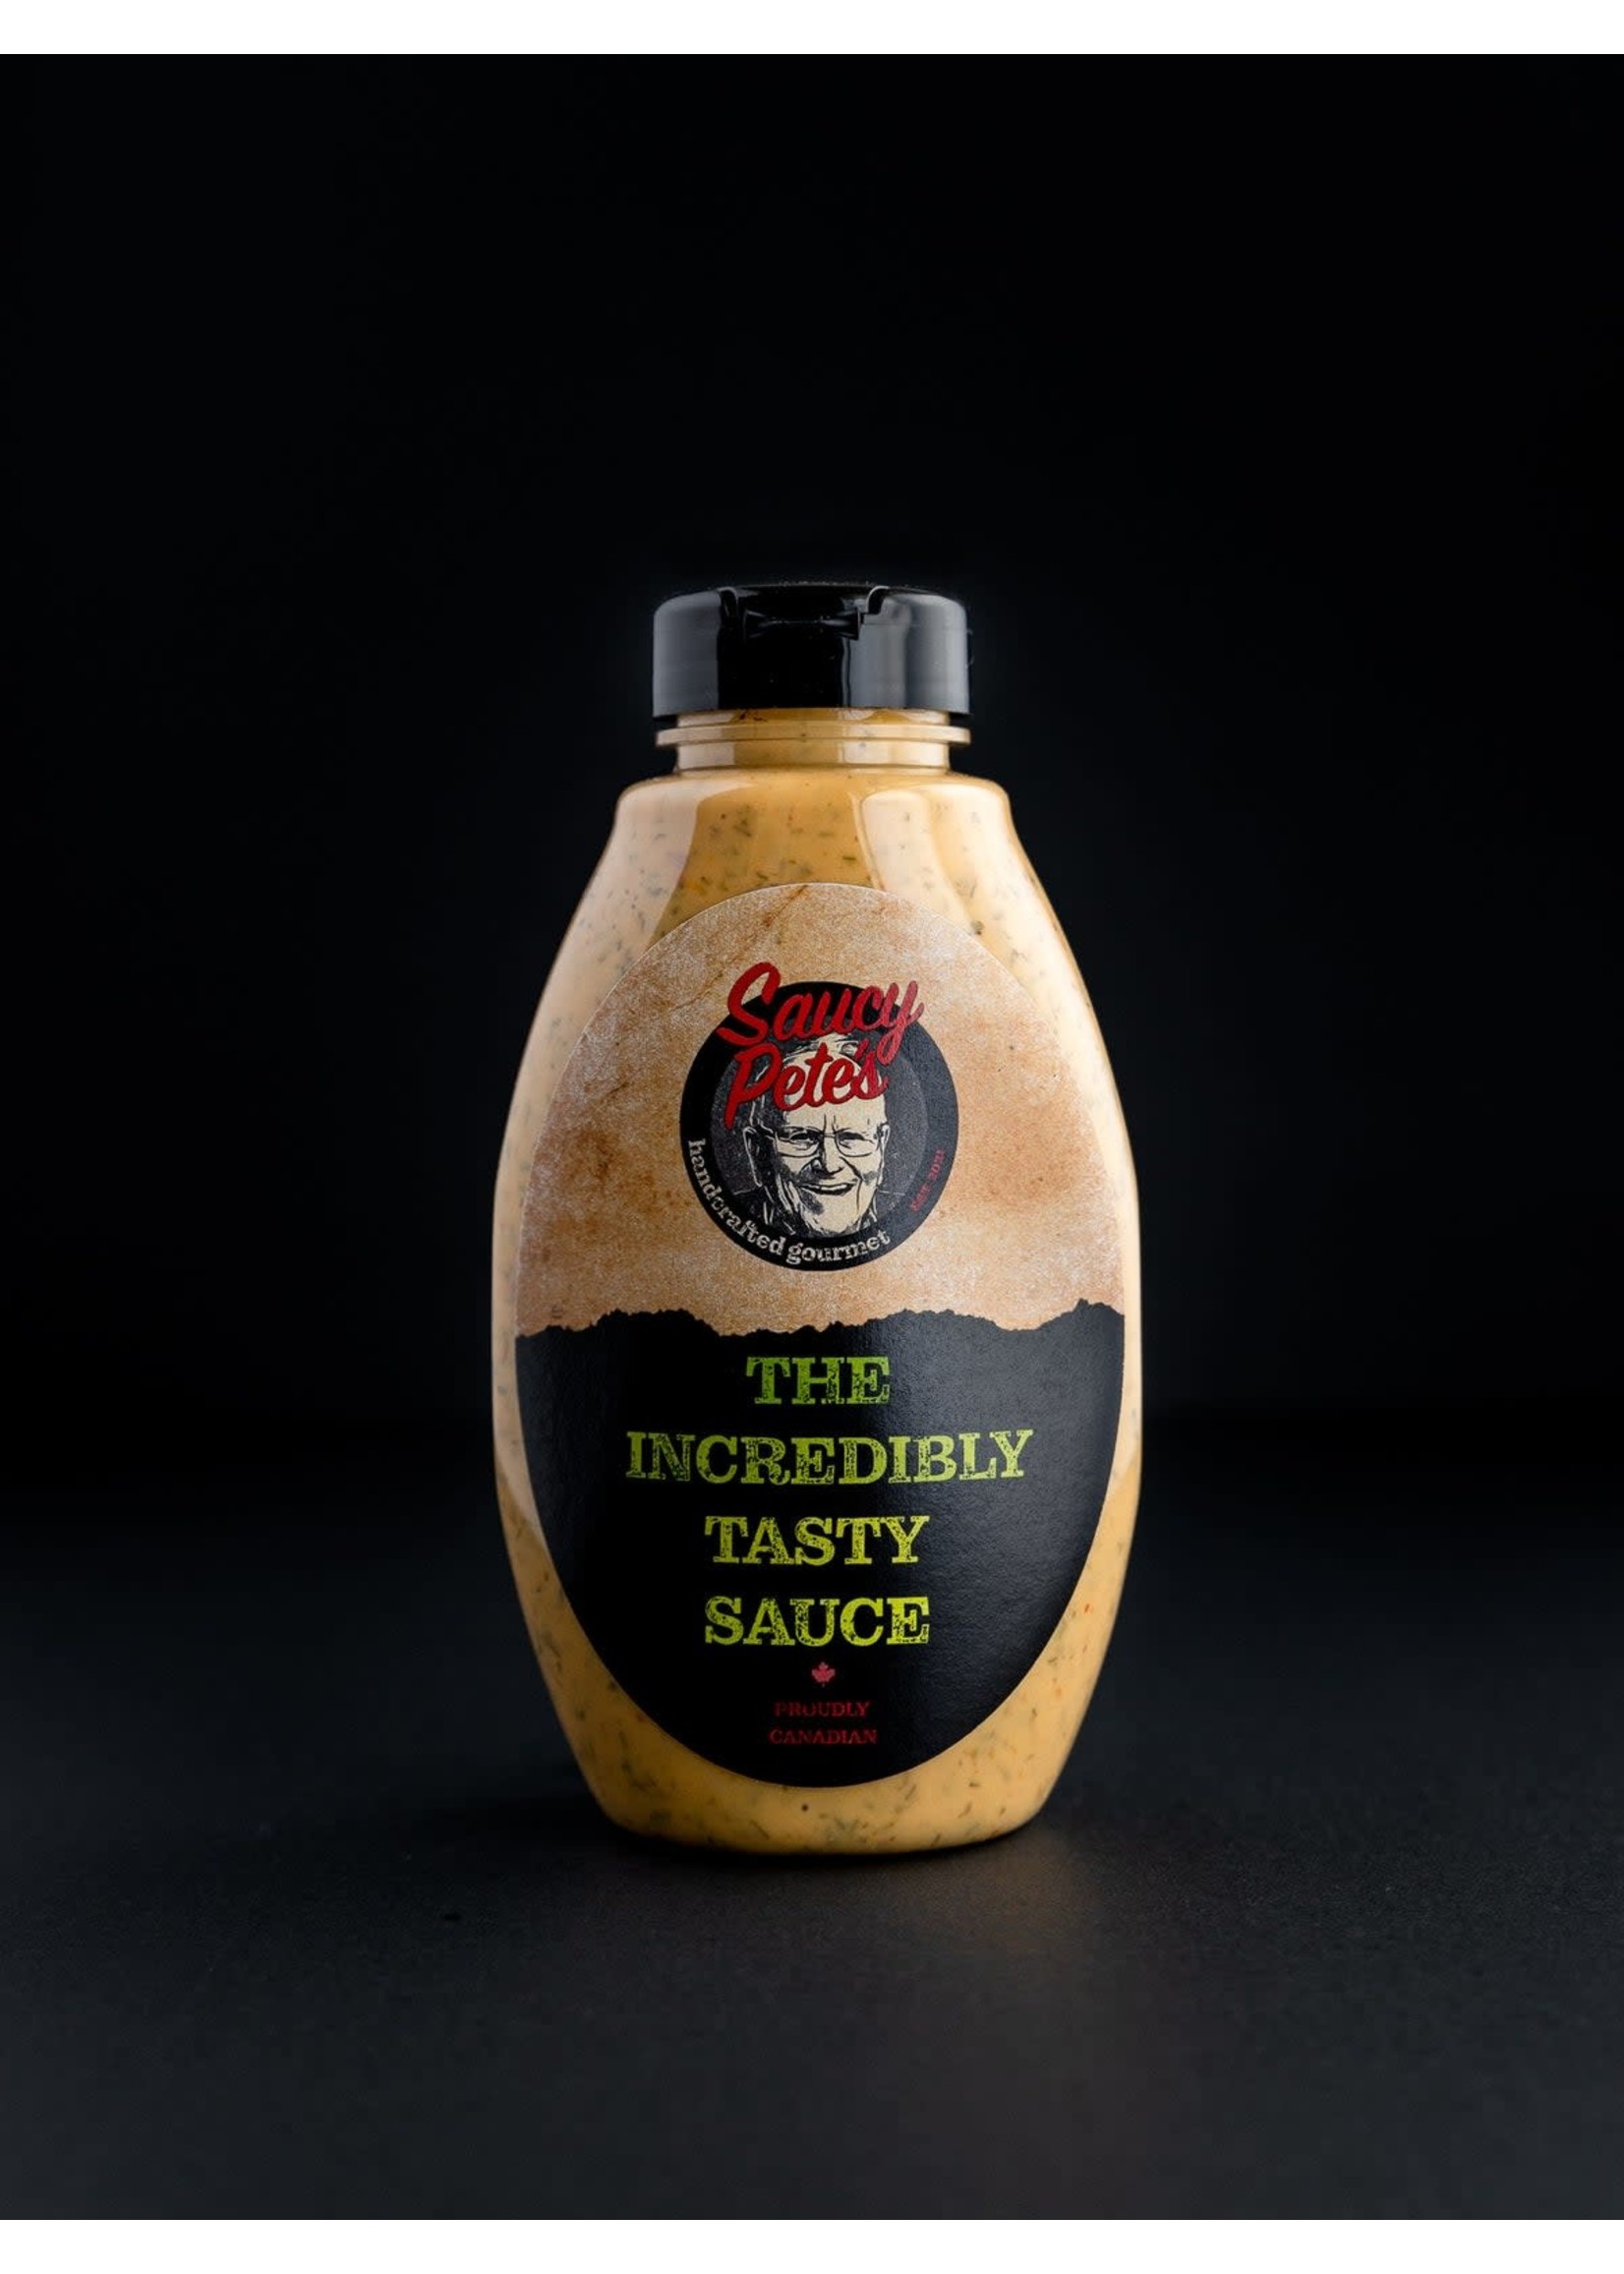 Saucy Pete's Saucy Pete's - The Incredibly Tasty Sauce